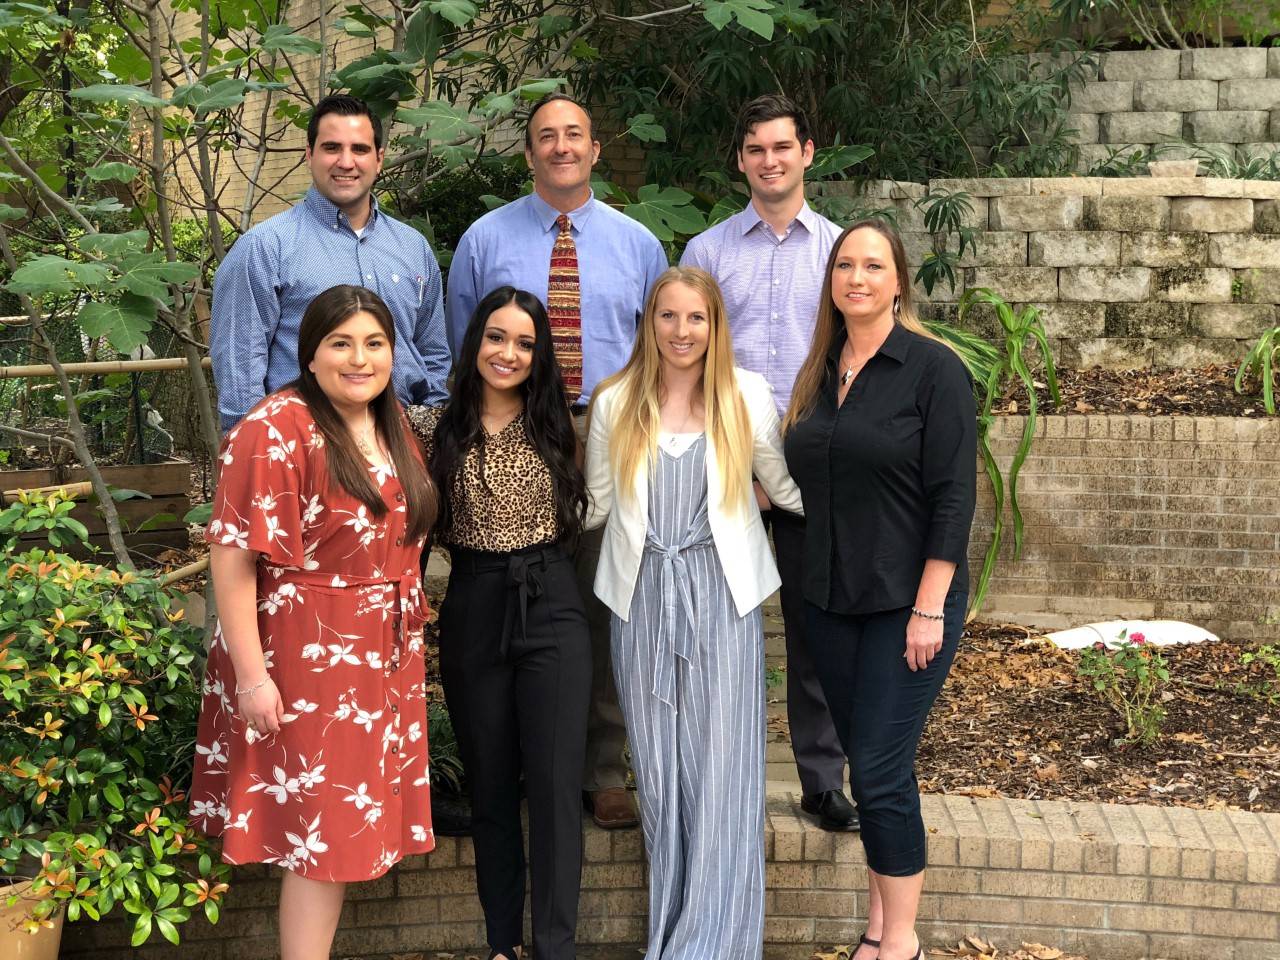 Texas State Student Teachers for Spring 2020 group picture